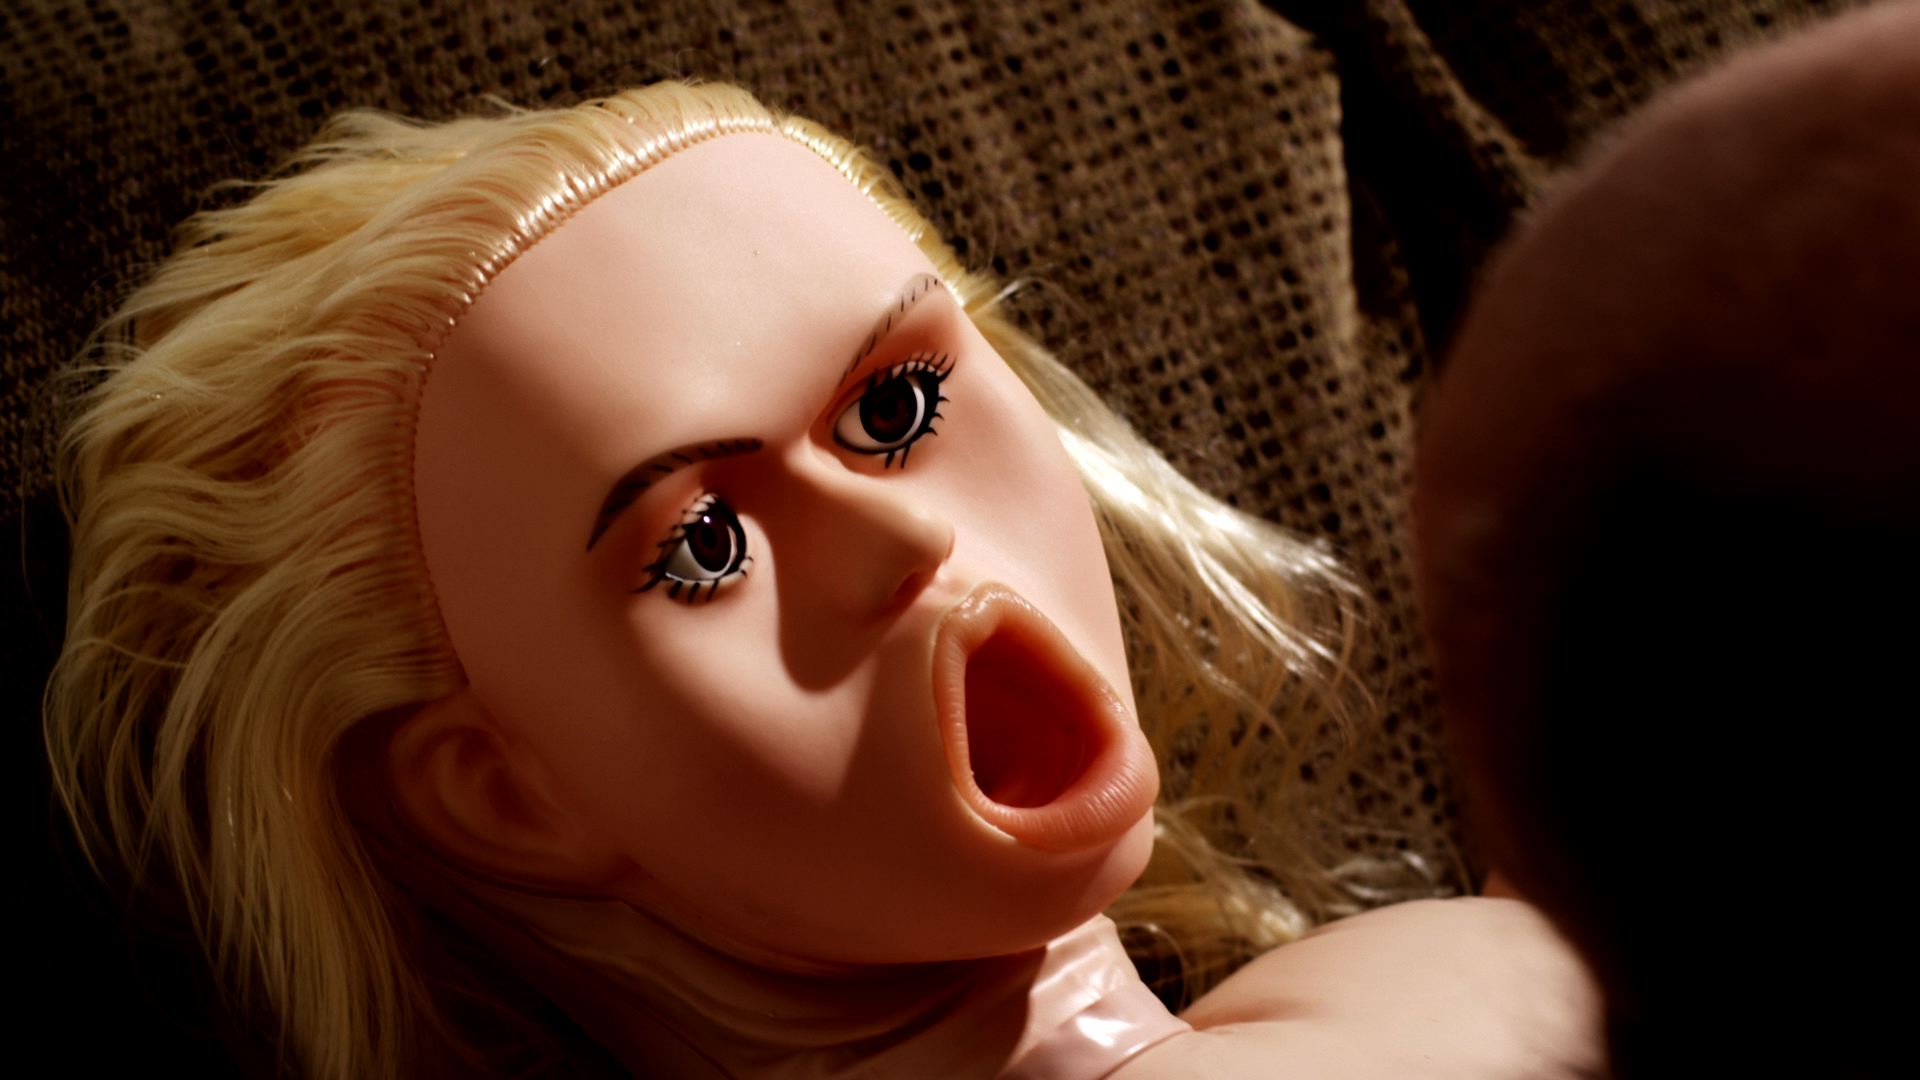 Teen Fuck Blow Up Doll 26